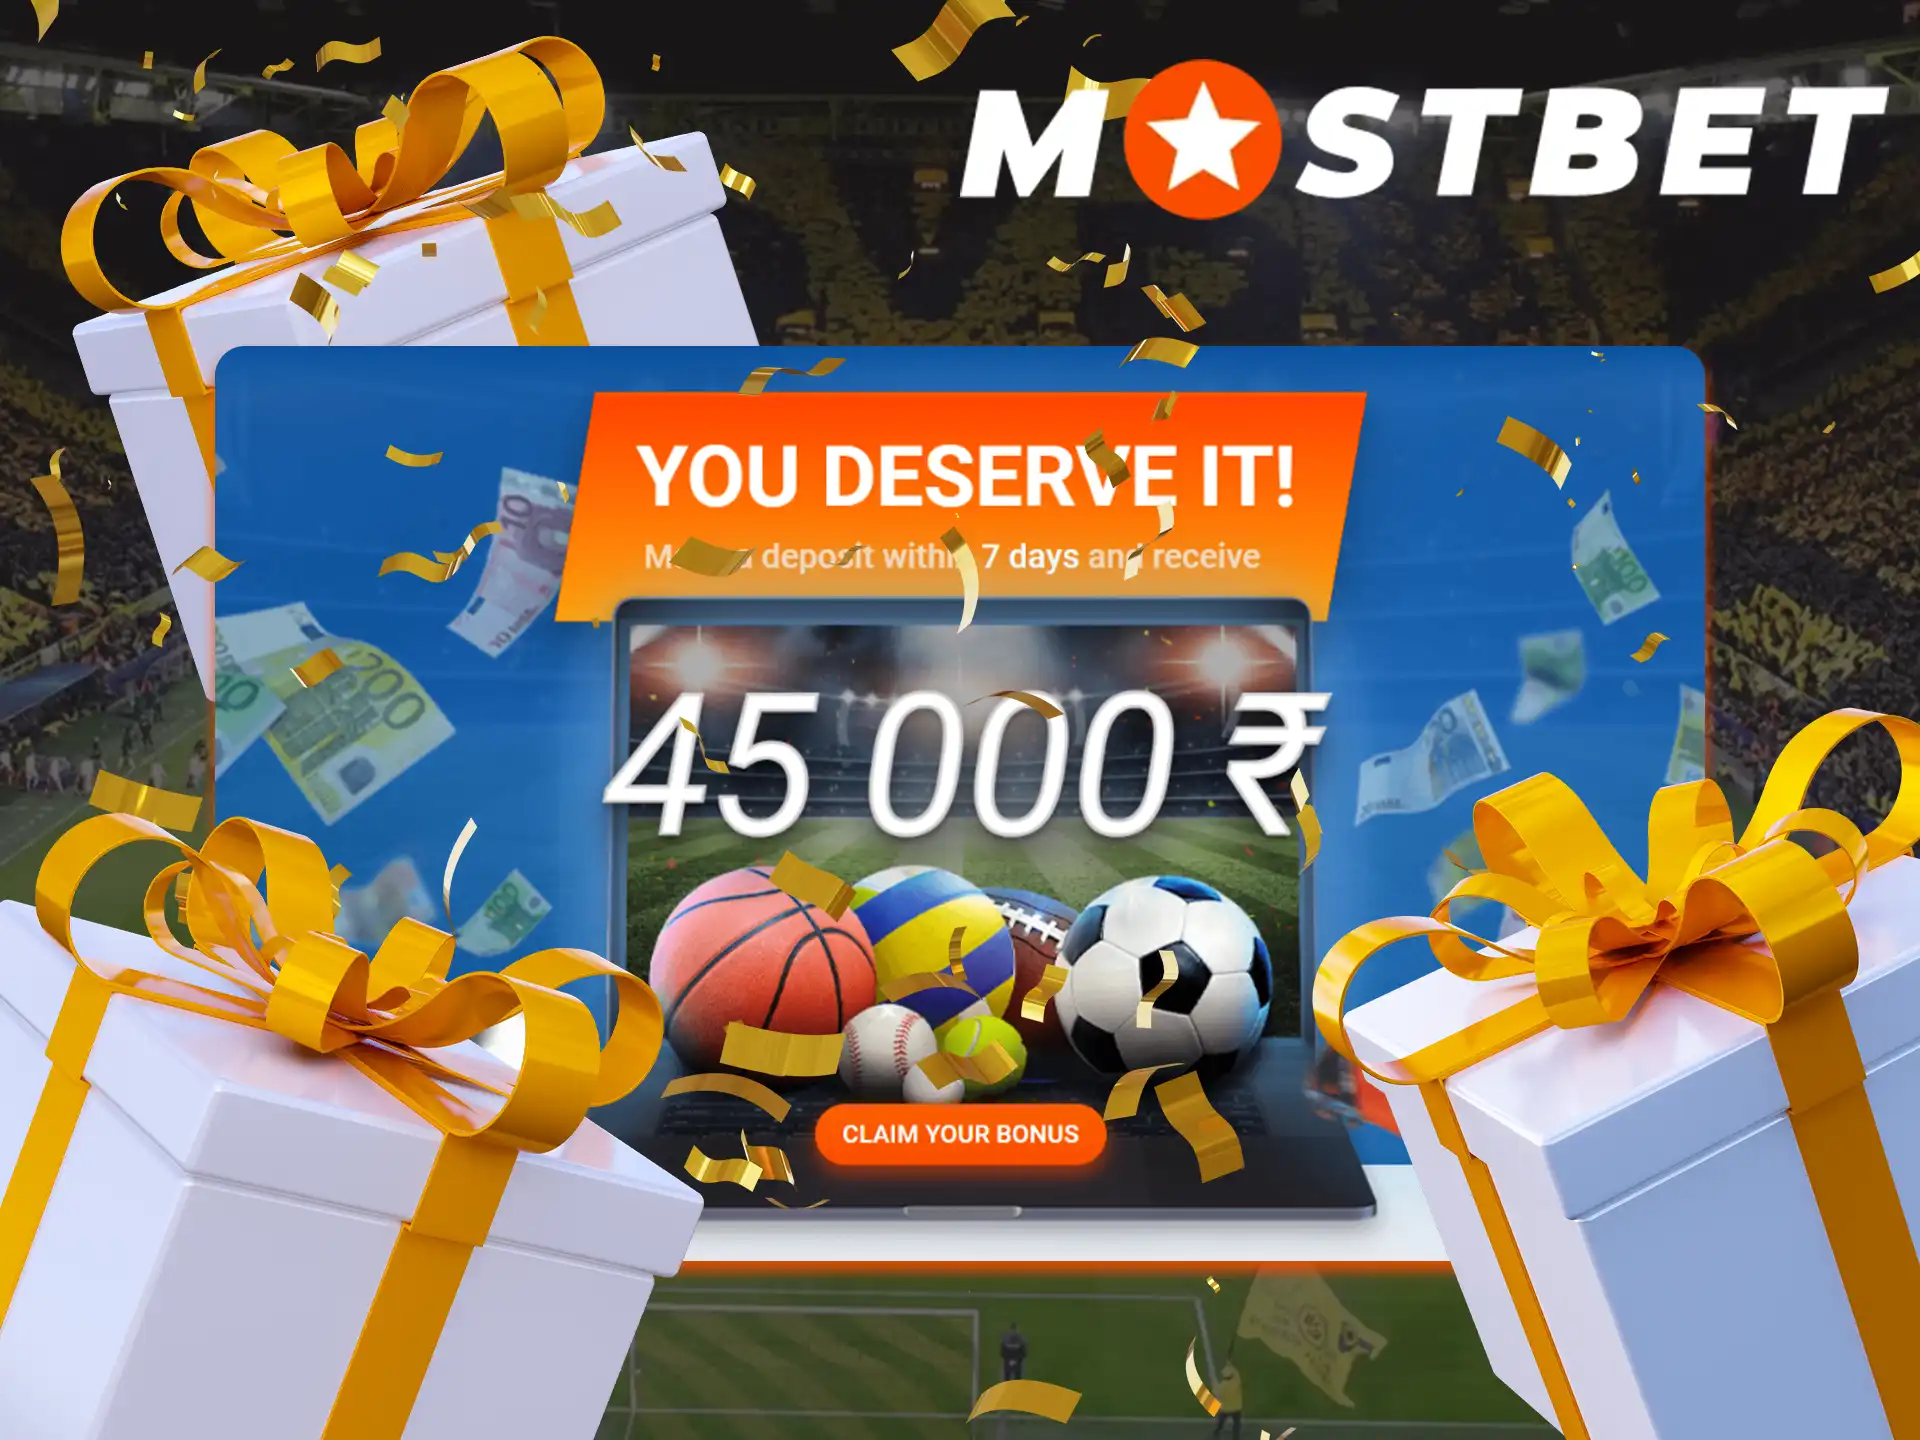 Mostbet gives a bonus when registering an account.